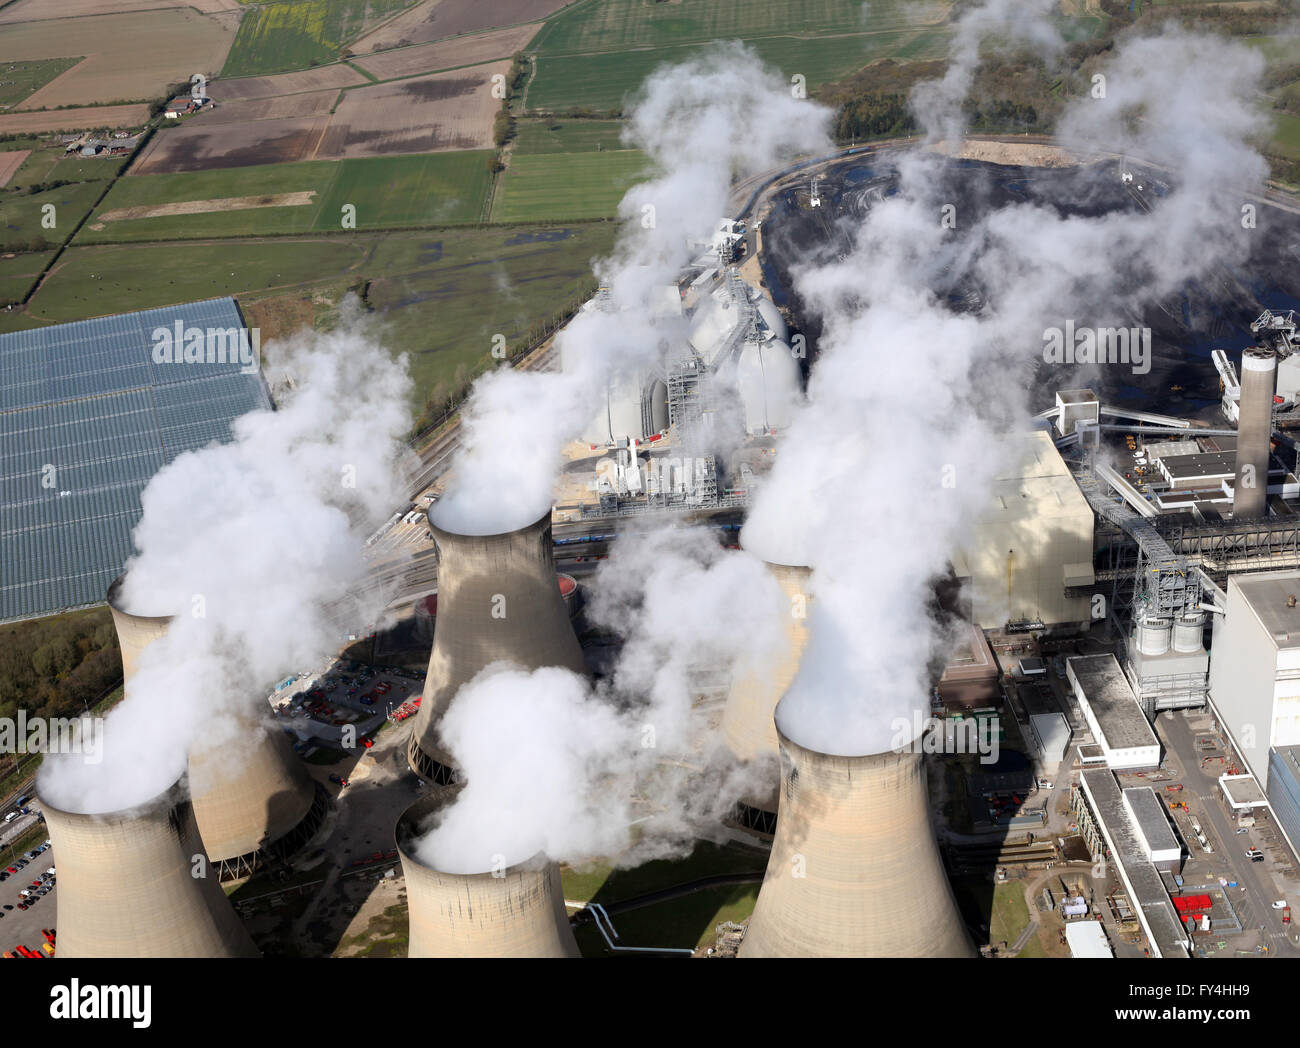 aerial view of steam from the cooling towers at Drax Power Station in Yorkshire, UK Stock Photo